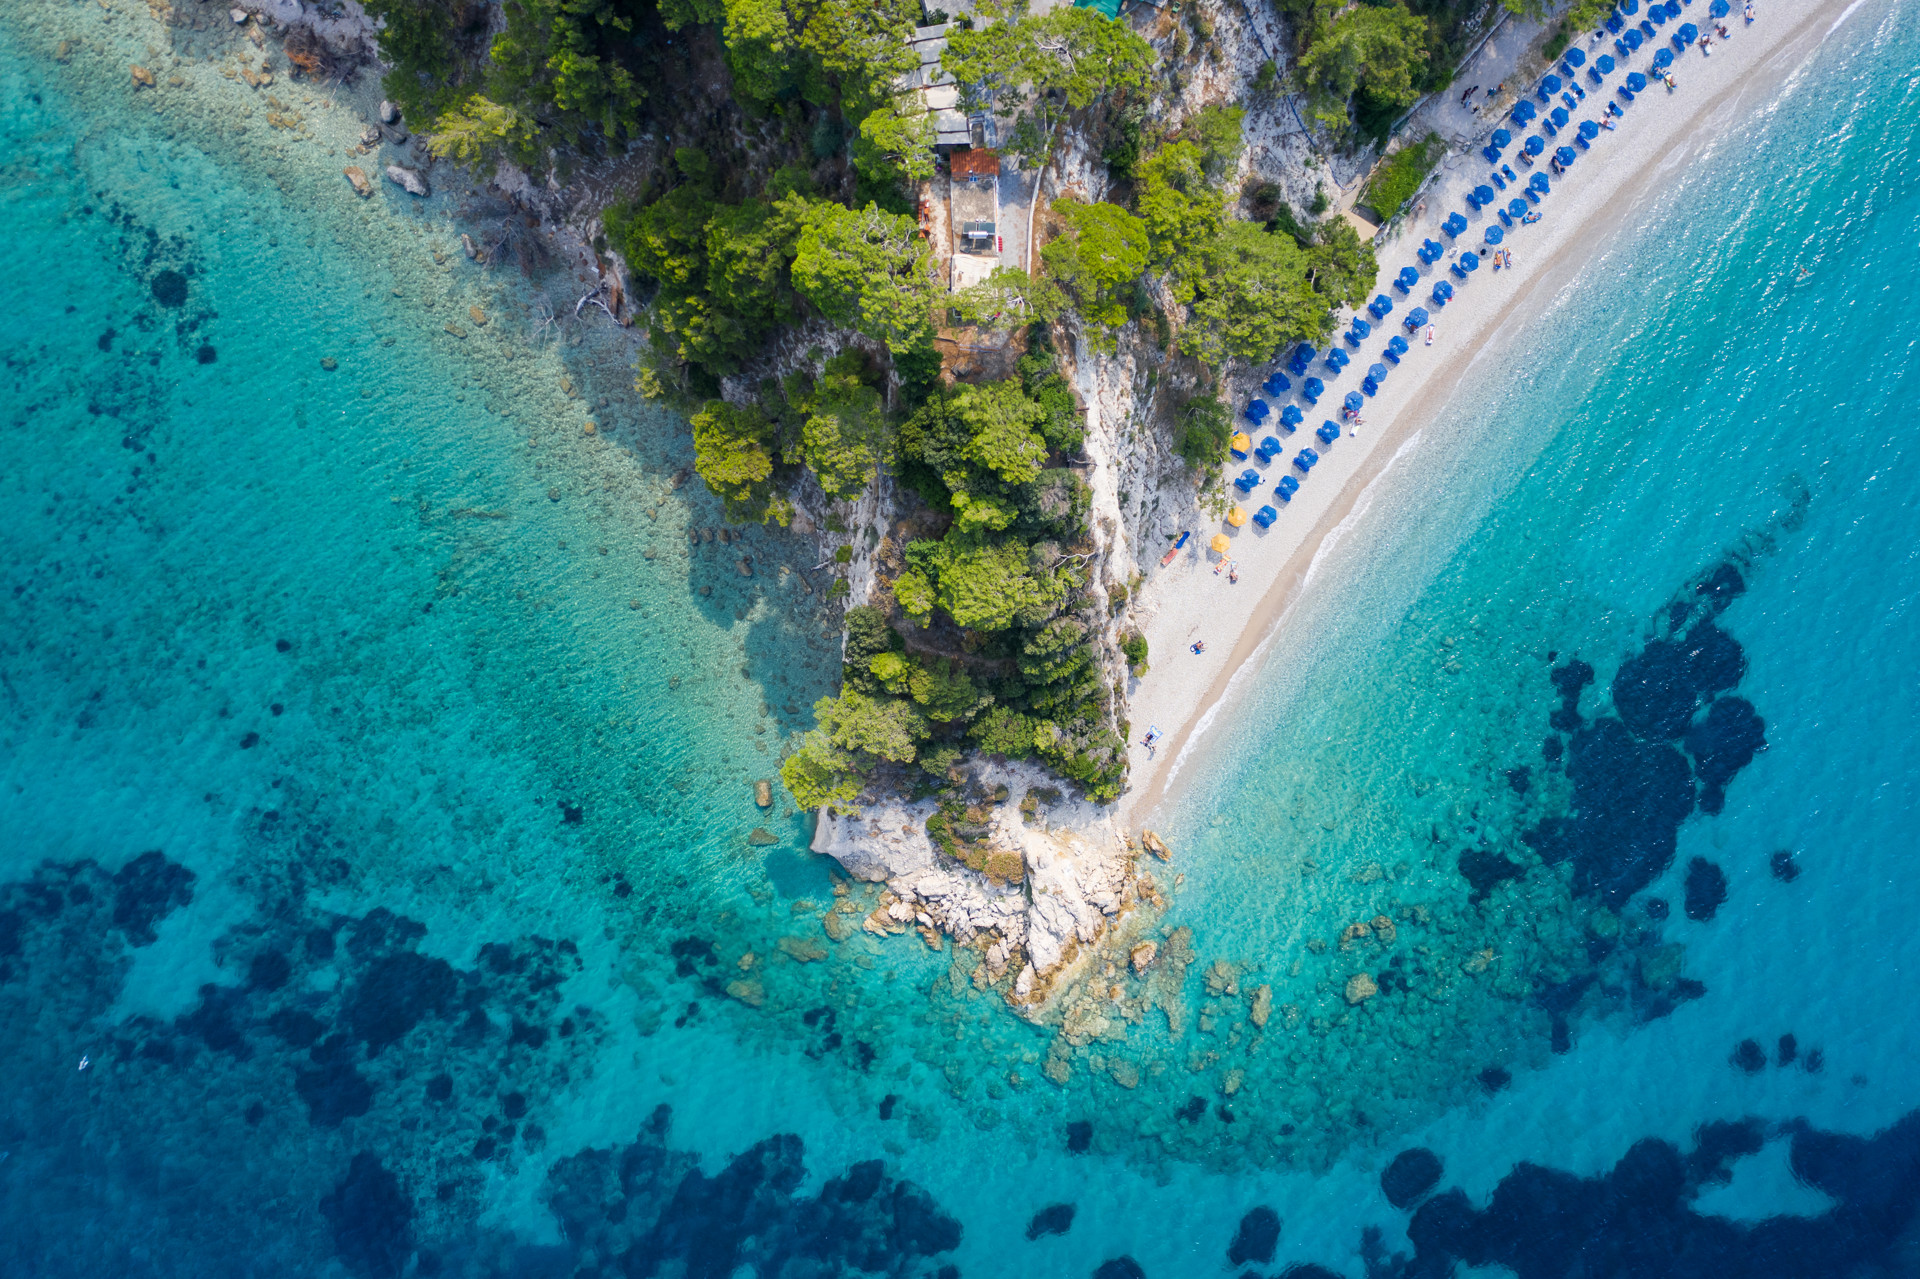 The thick pine groves around Tsamadou beach in Samos give it a tropical feel